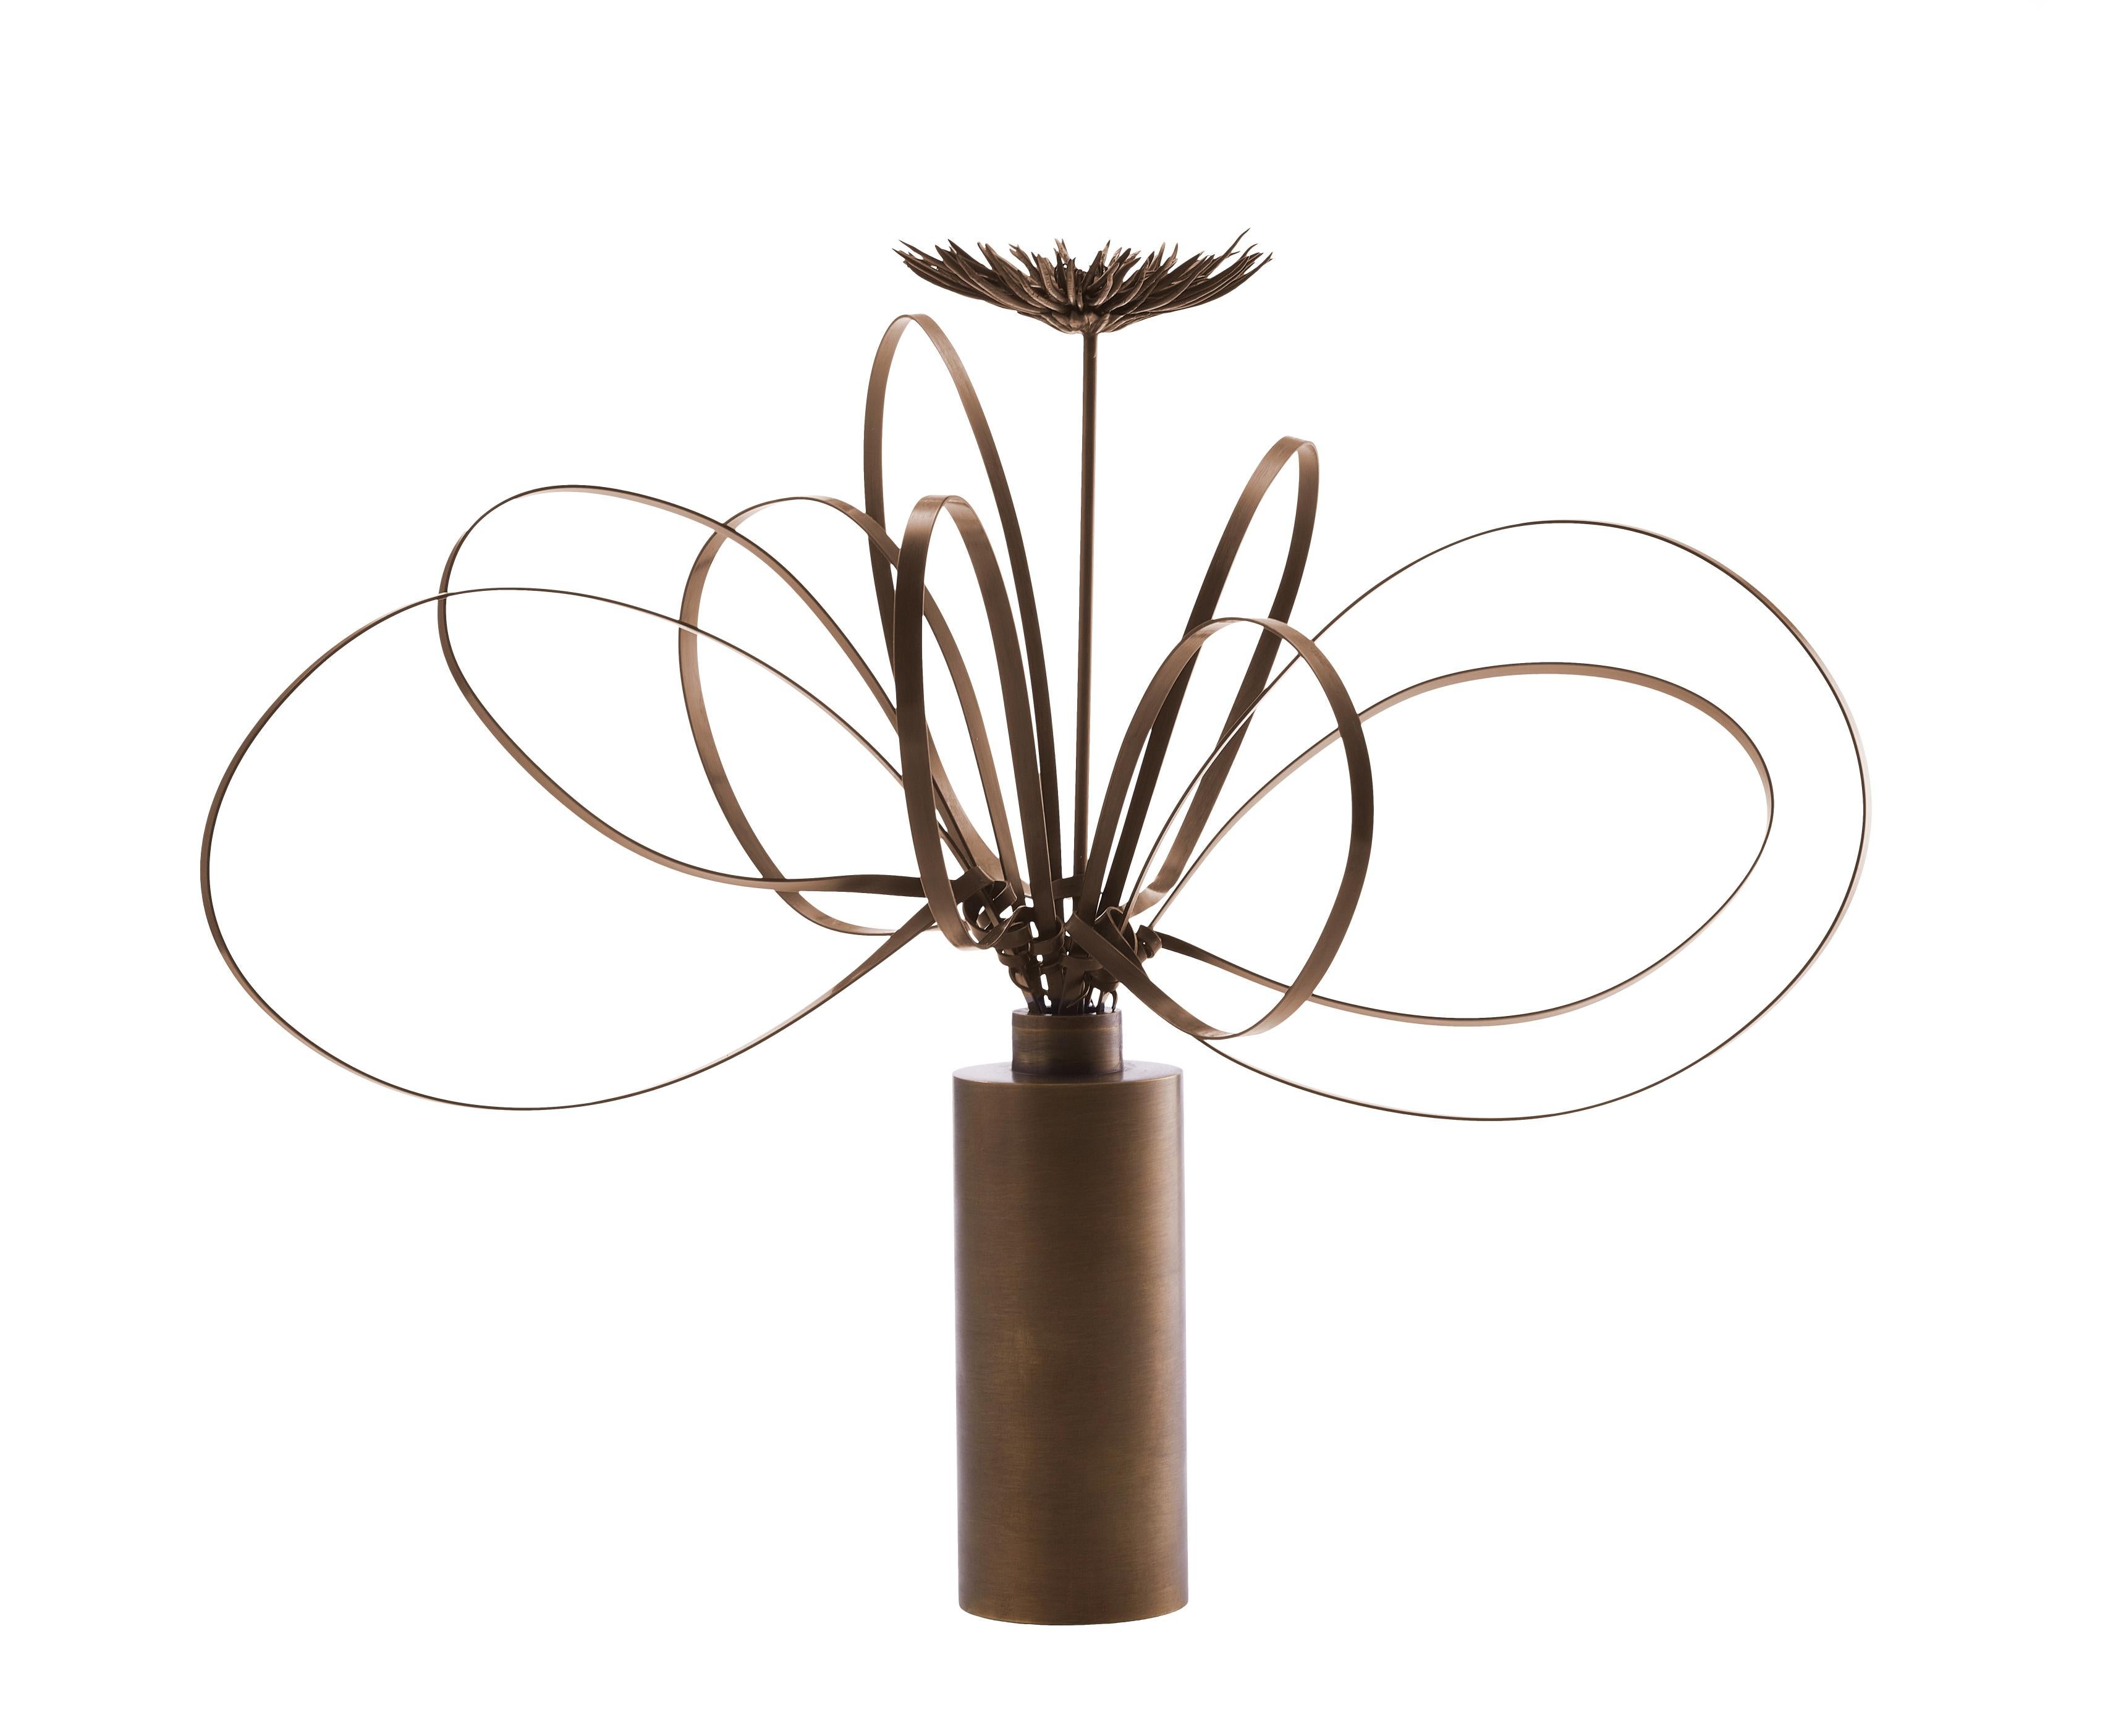 Tall Bronze Swirl and Mum by Art Flower Maker
Unique Piece.
Dimensions: Ø 58 x H 47 cm.
Materials: Hand Painted Bronzed Brass.

The artistic eye of The Art Flower Maker combined with Italian artisanal metalwork has brought to life these unique